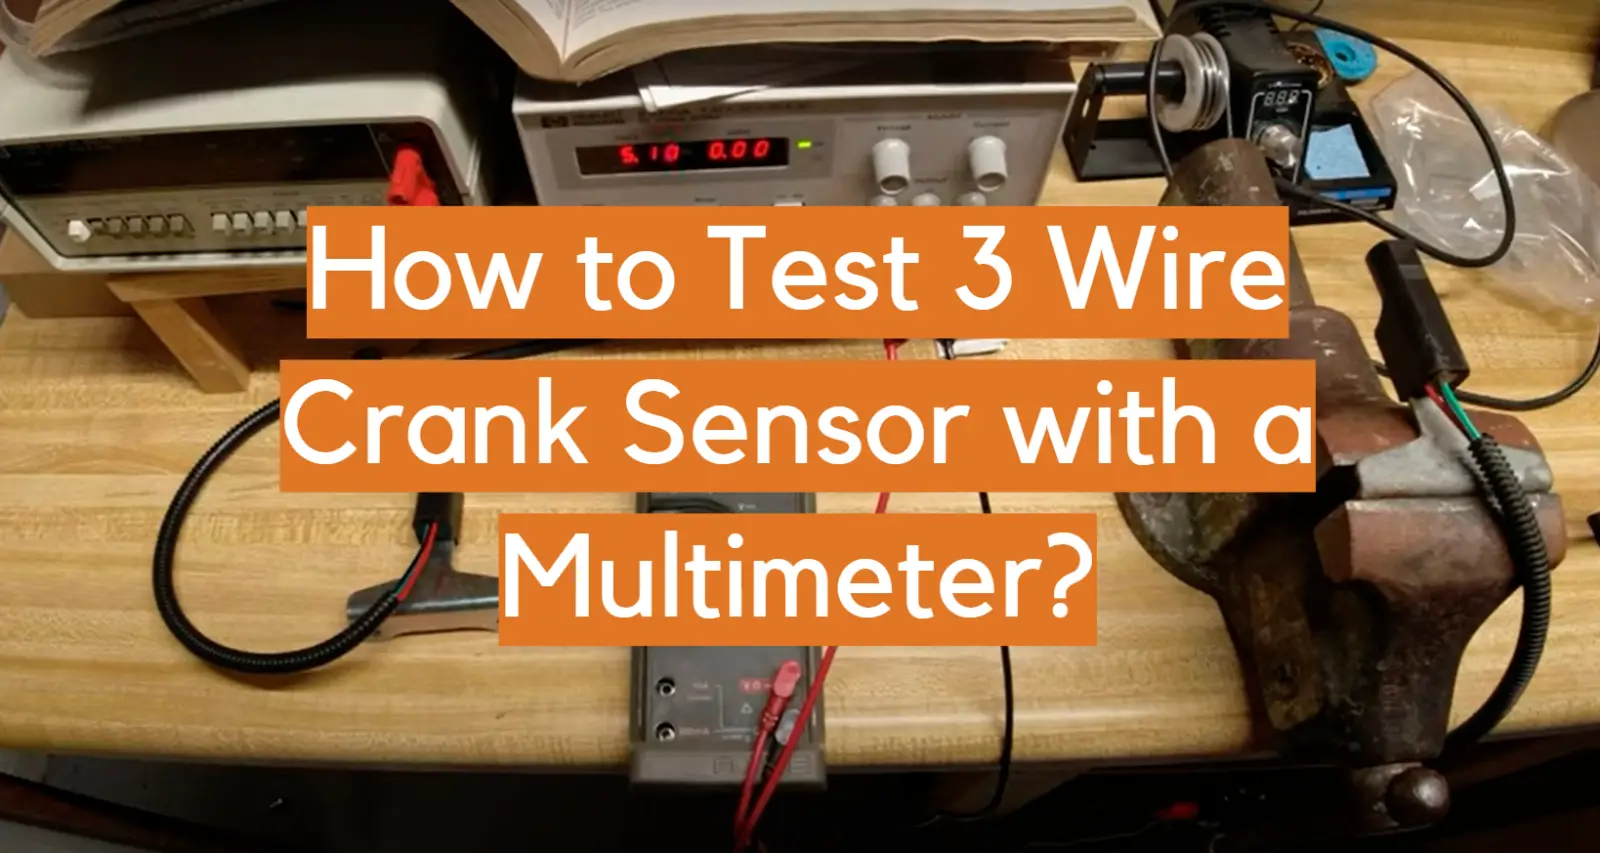 How to Test 3 Wire Crank Sensor with a Multimeter?